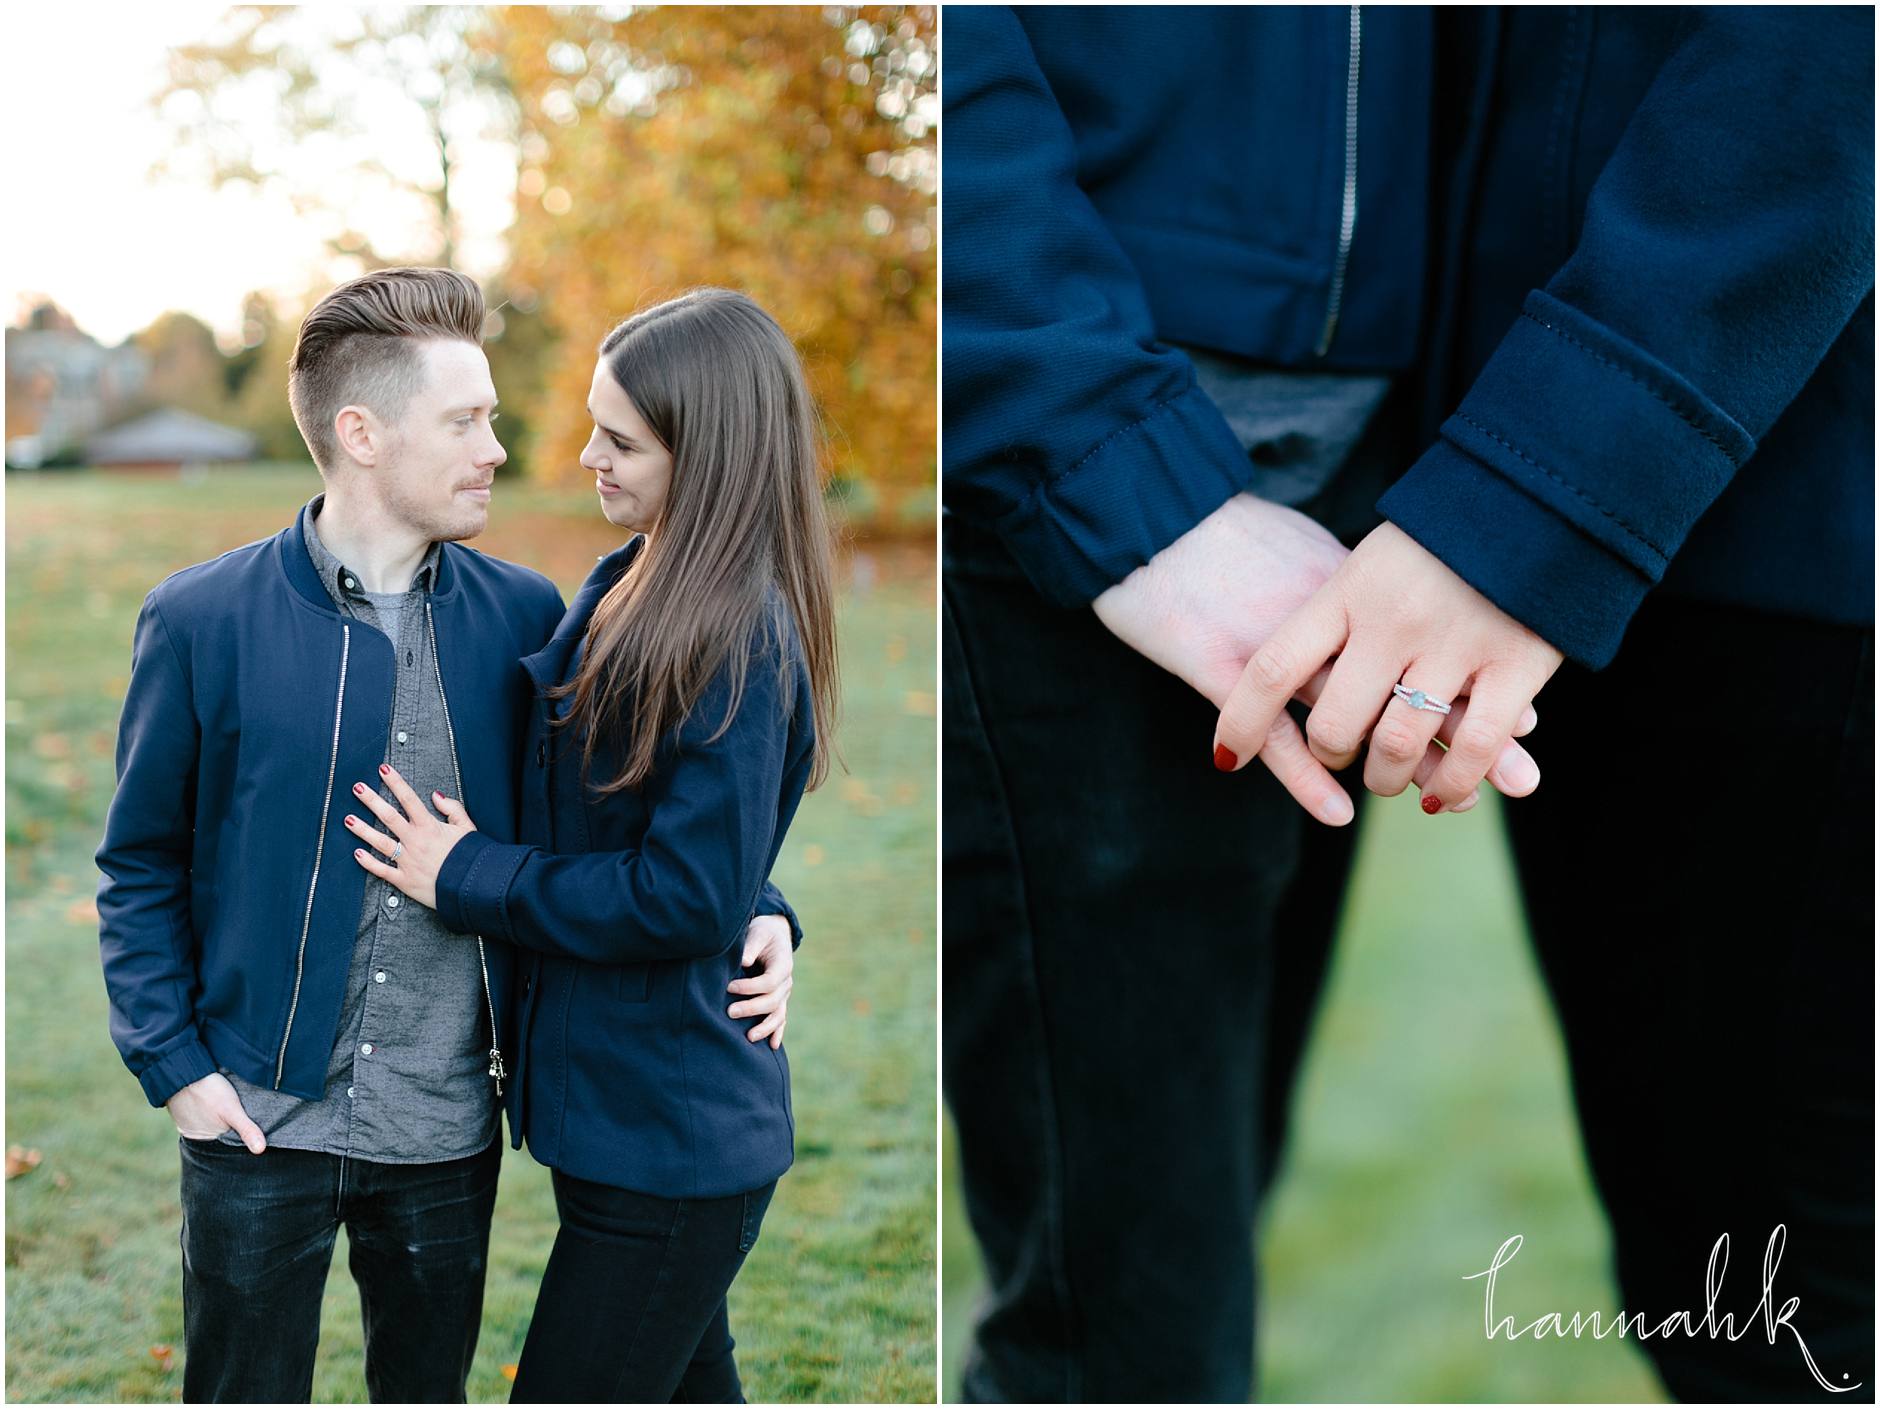 hannah-k-photography-coventry-warwickshire-west-midlands-engagement-photographer-42